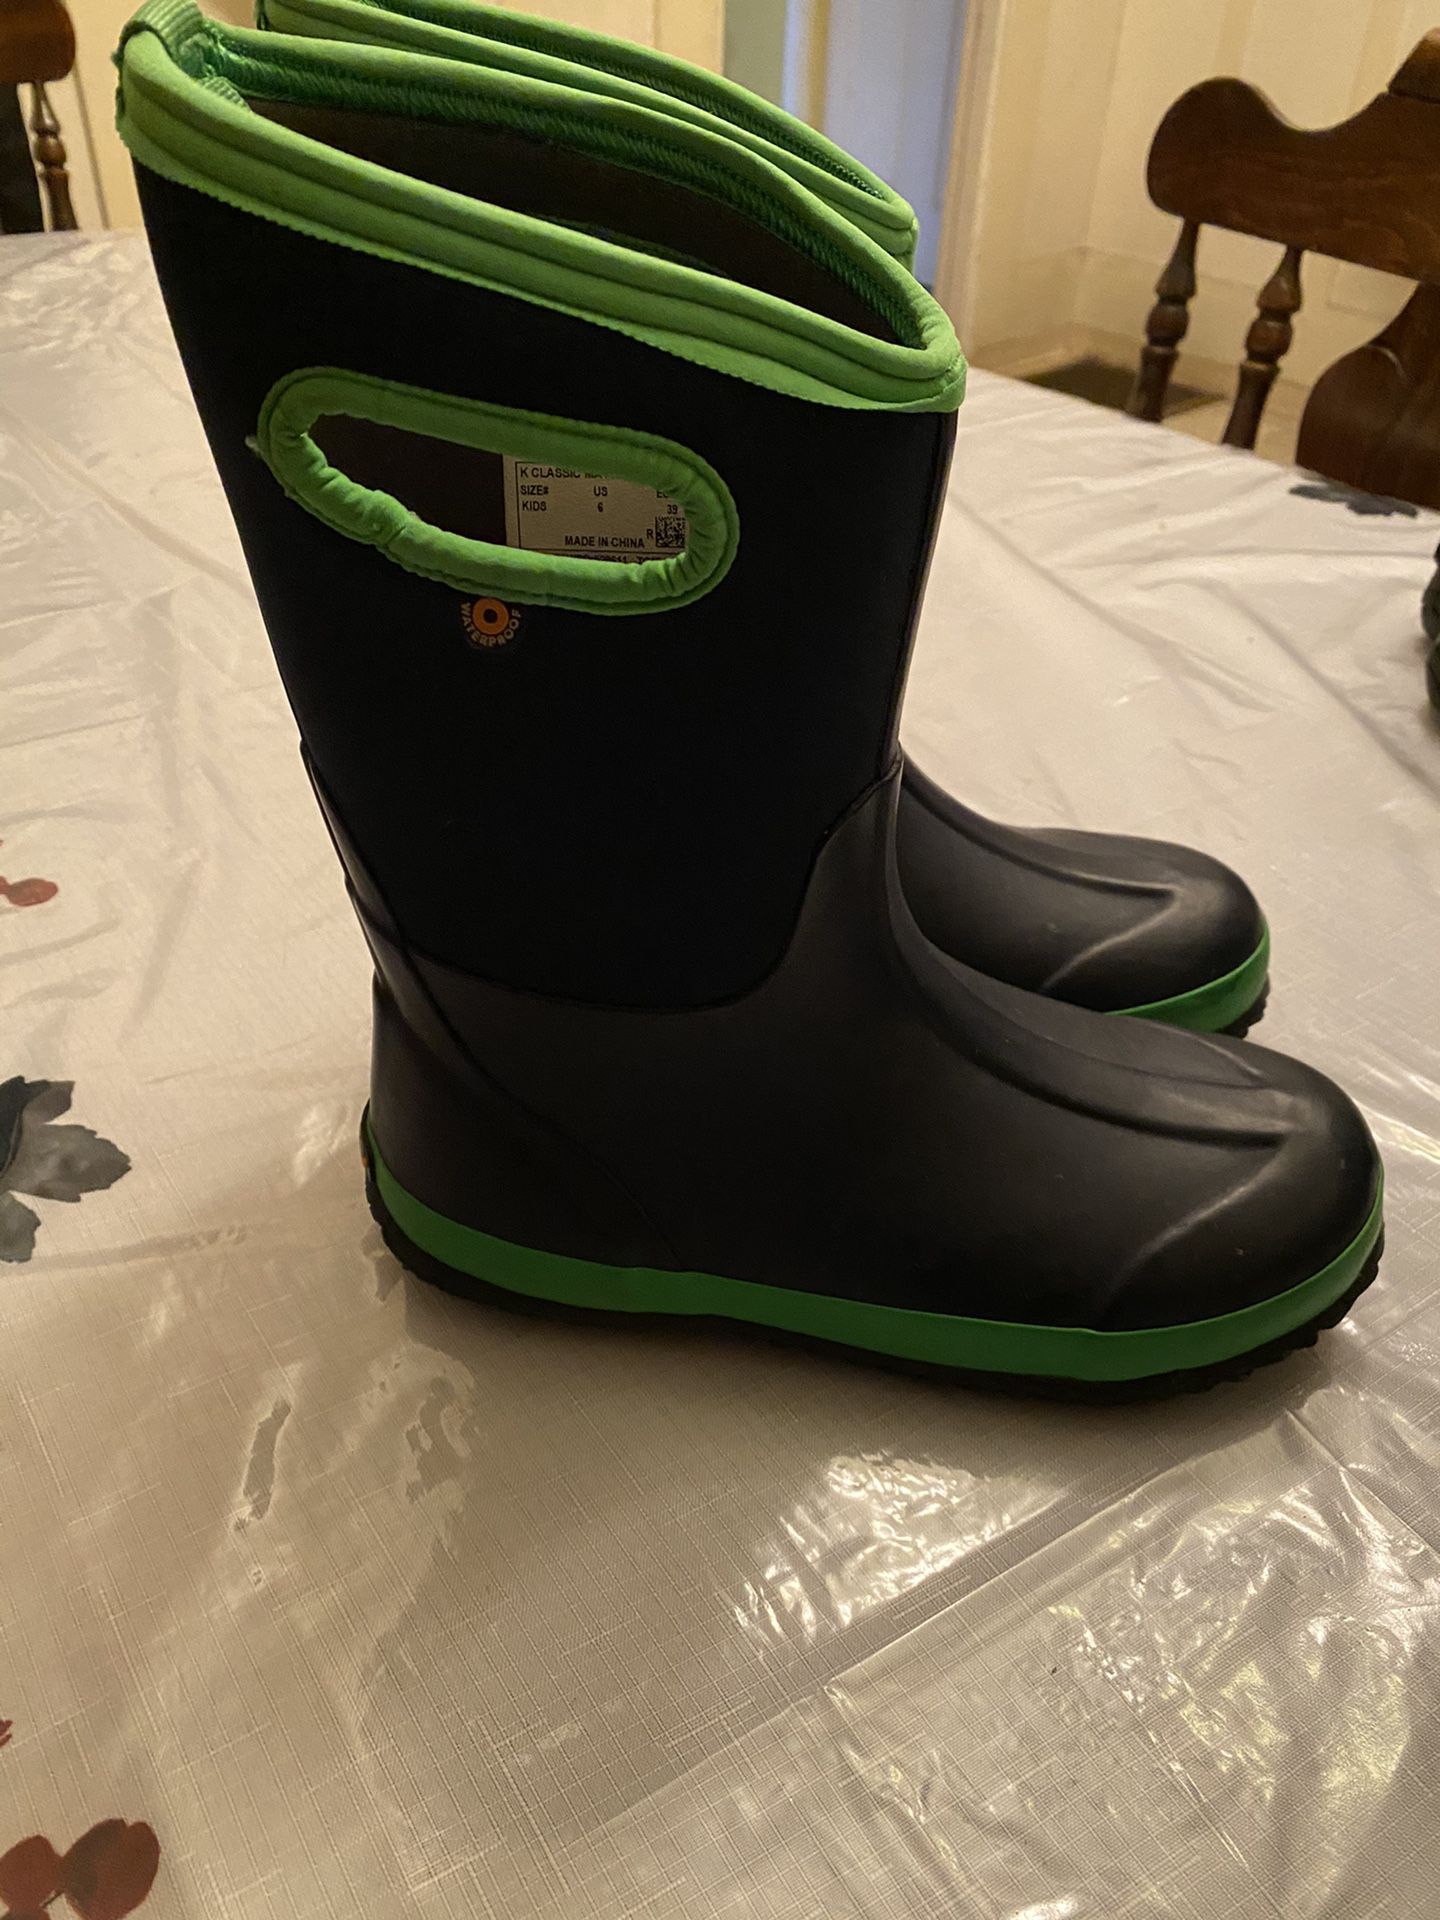 Kids Size 6 Rain Snow Boots Size 6 In Beautiful Condition